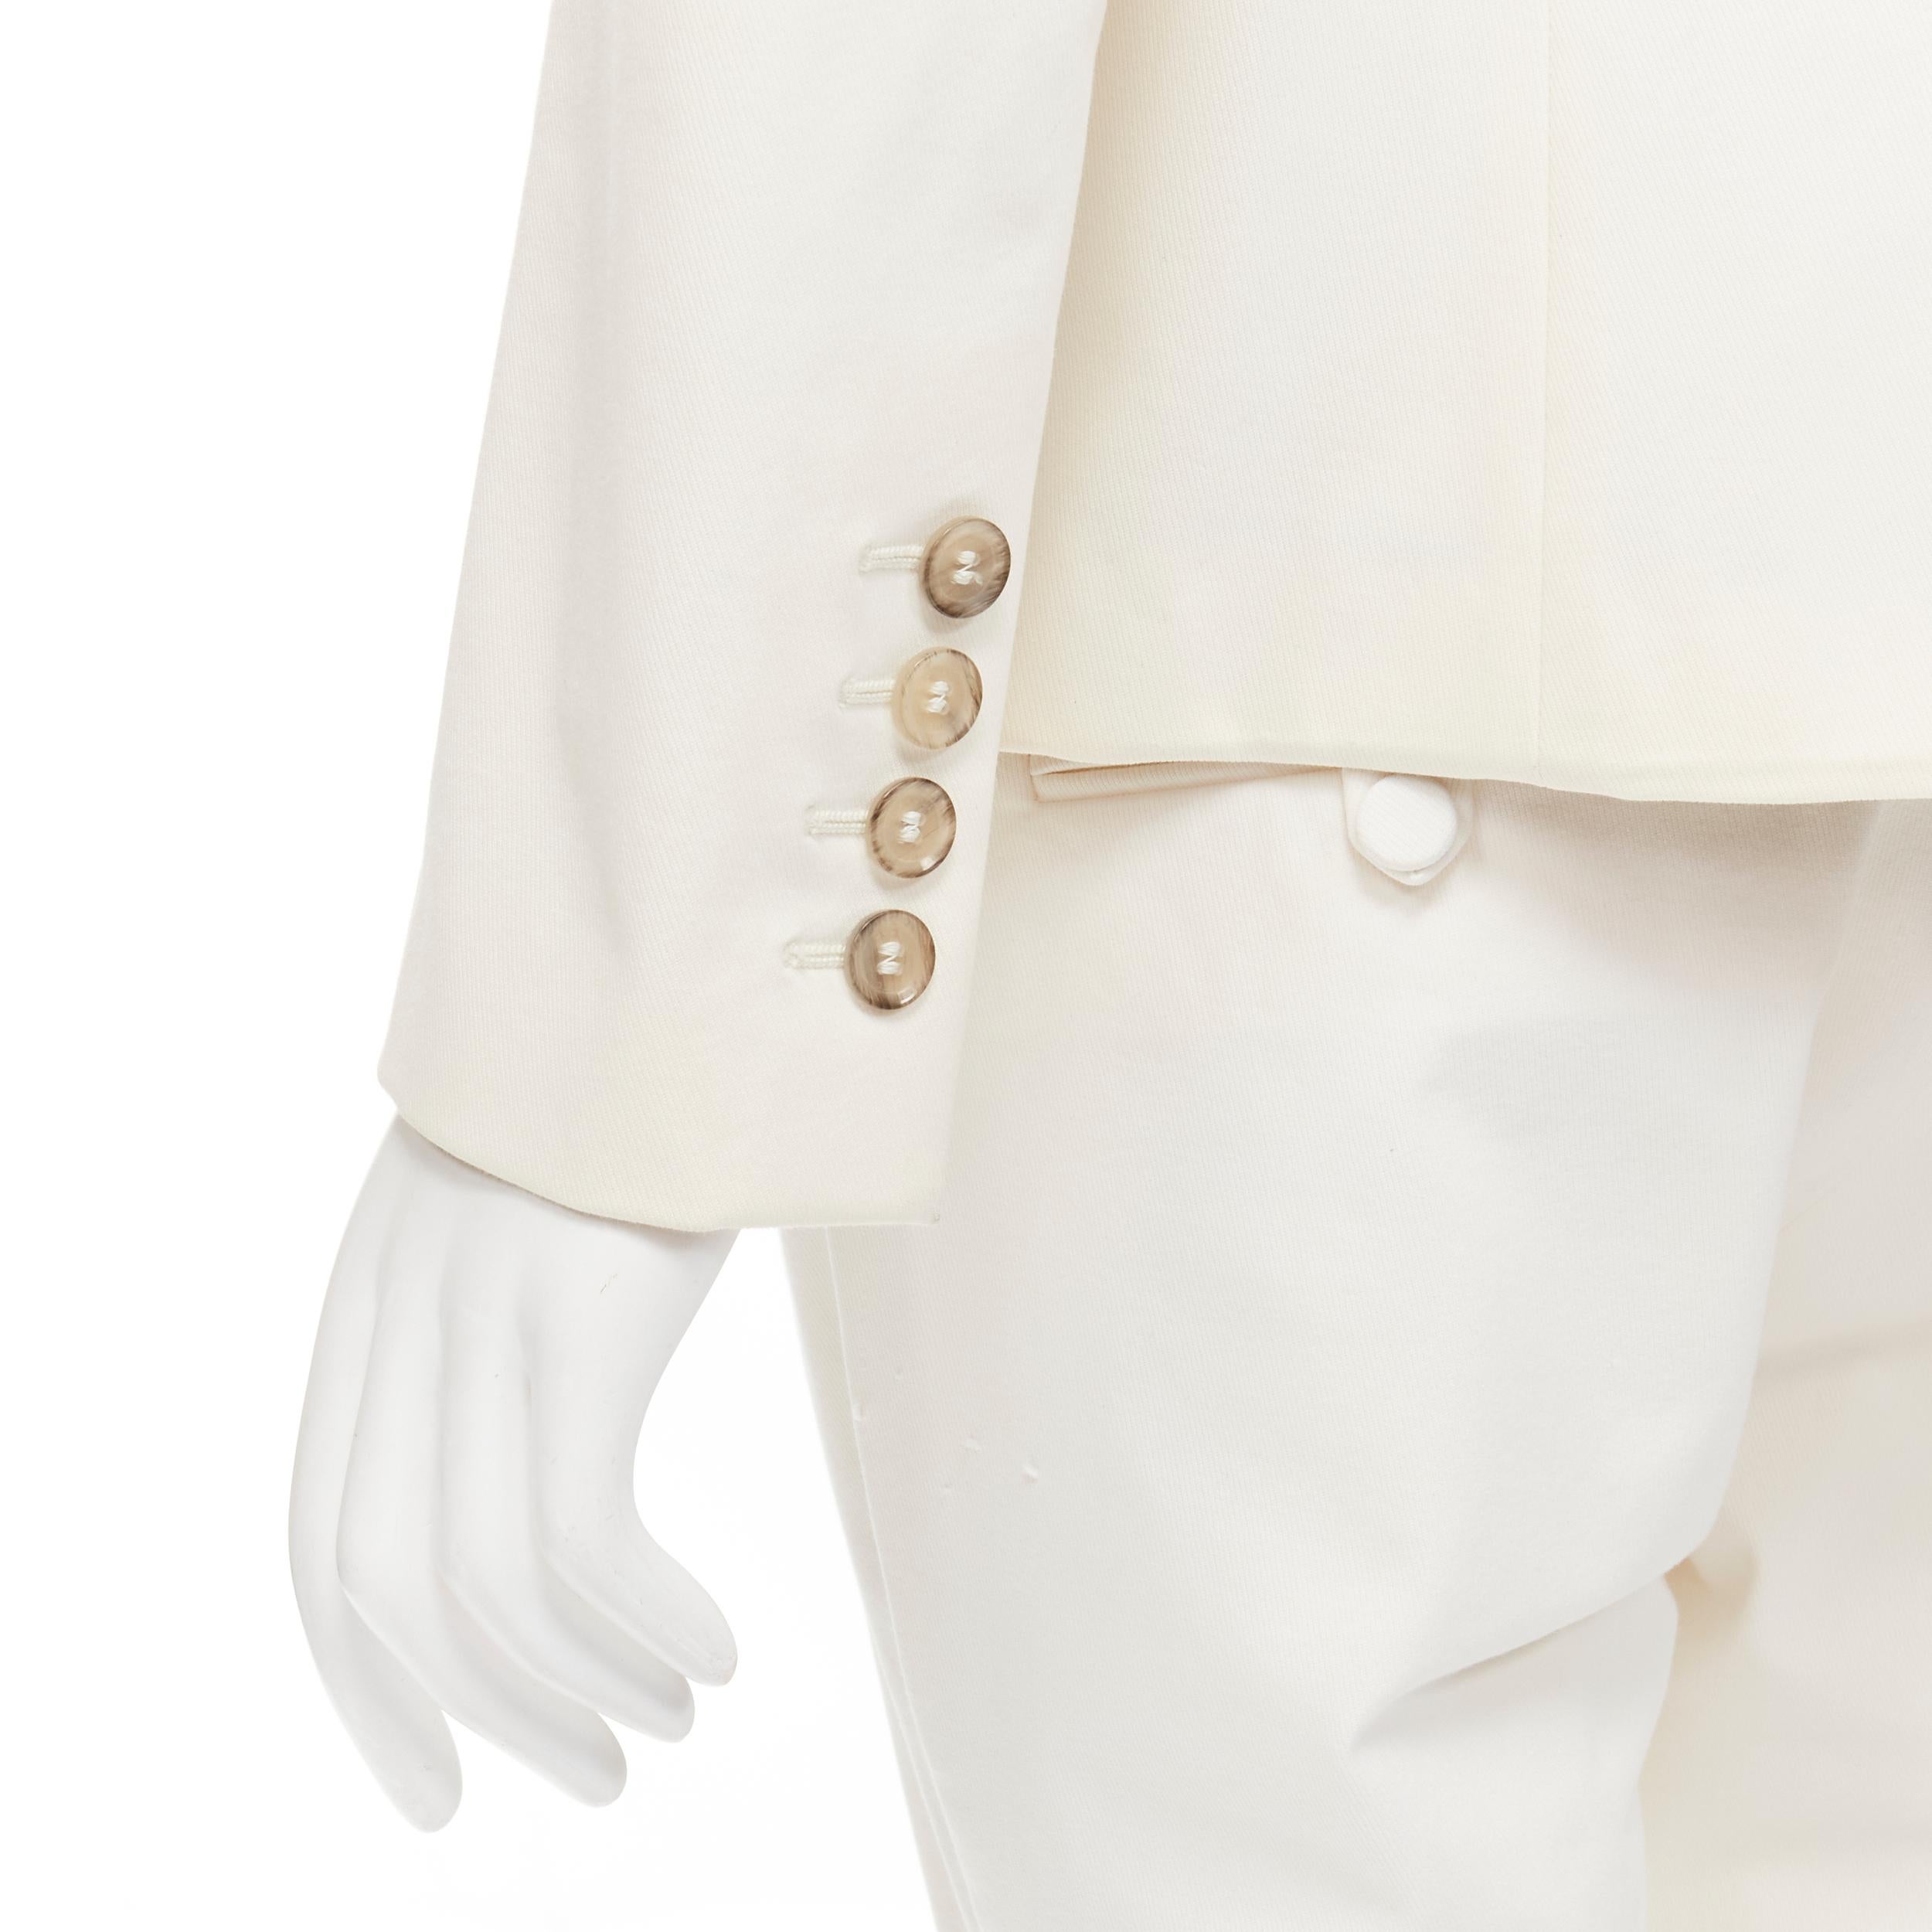 GUCCI Vintage Kris Knight floral silk lined white cotton blazer pants IT46 XL 
Reference: GIYG/A00174 
Brand: Gucci 
Material: Cotton 
Color: White 
Pattern: Solid 
Closure: Button 
Extra Detail: Peak collar blazer. Kris Knight floral print silk